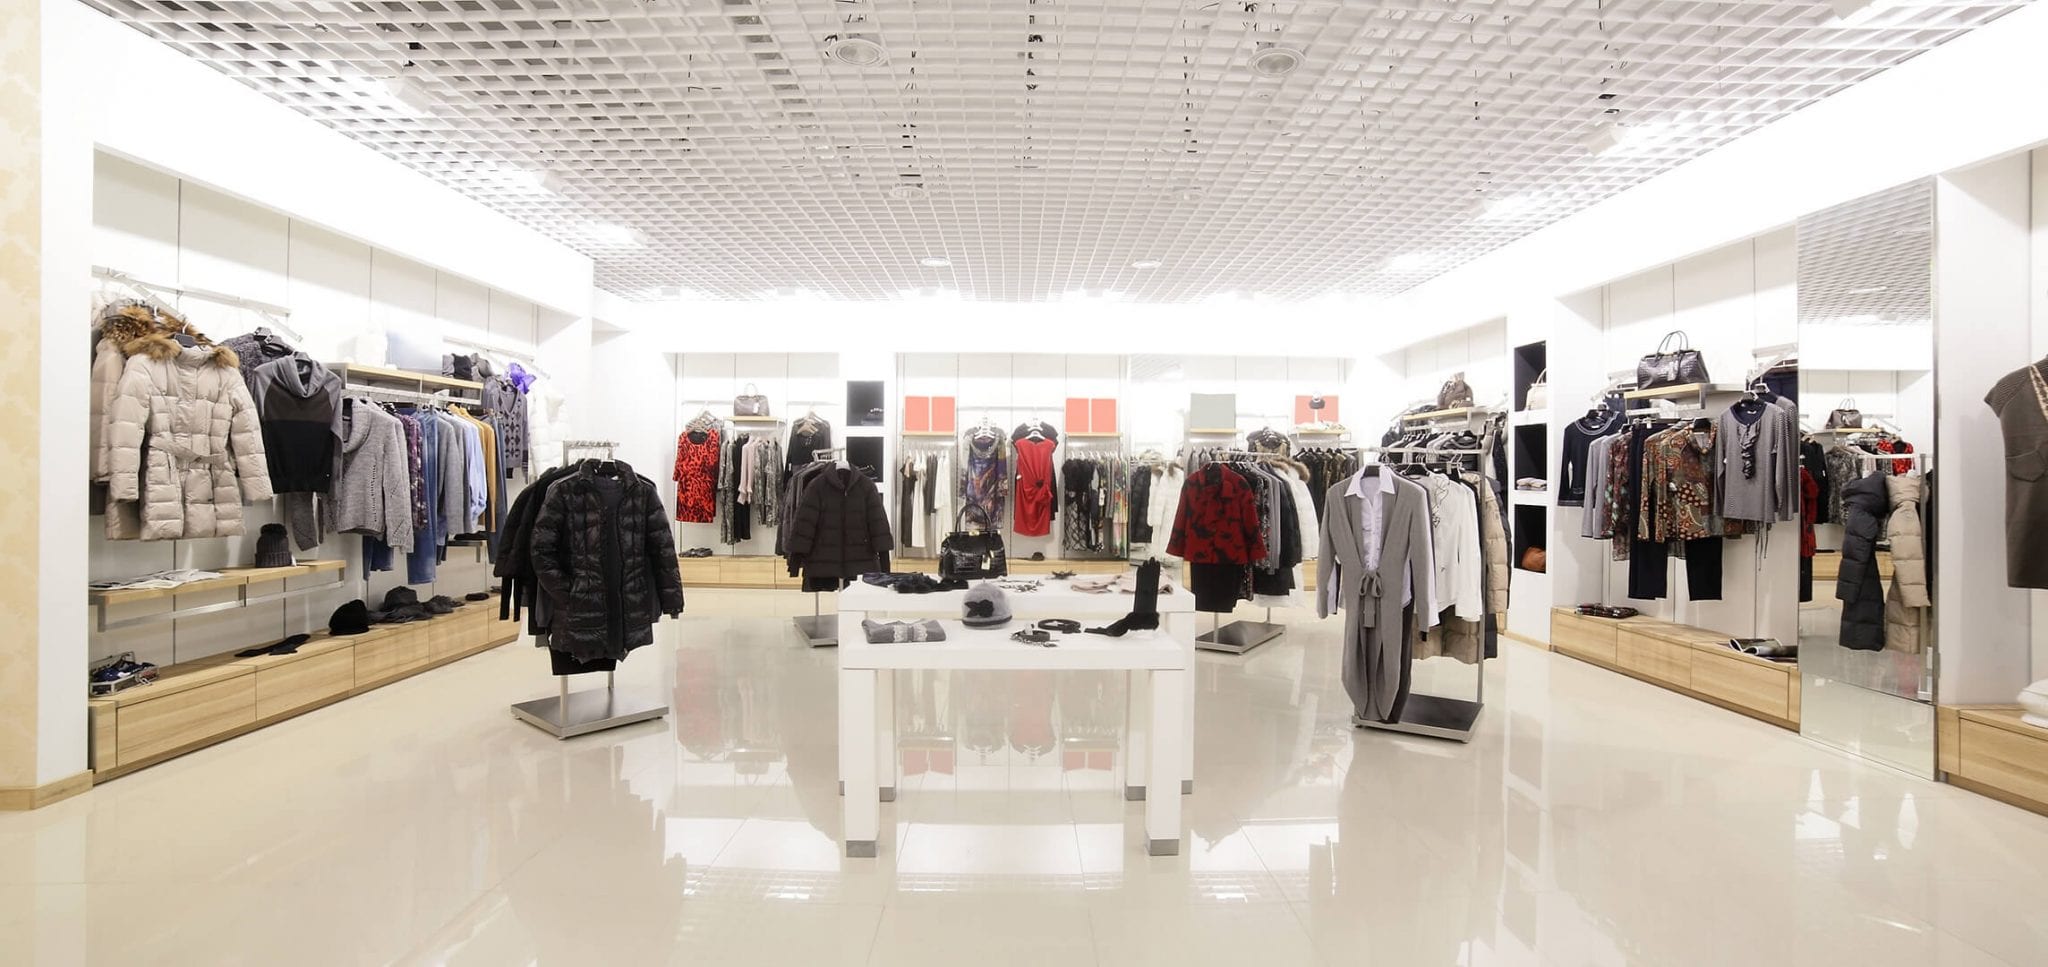 360 degree shopping experience panorama view in interior of a apparel store